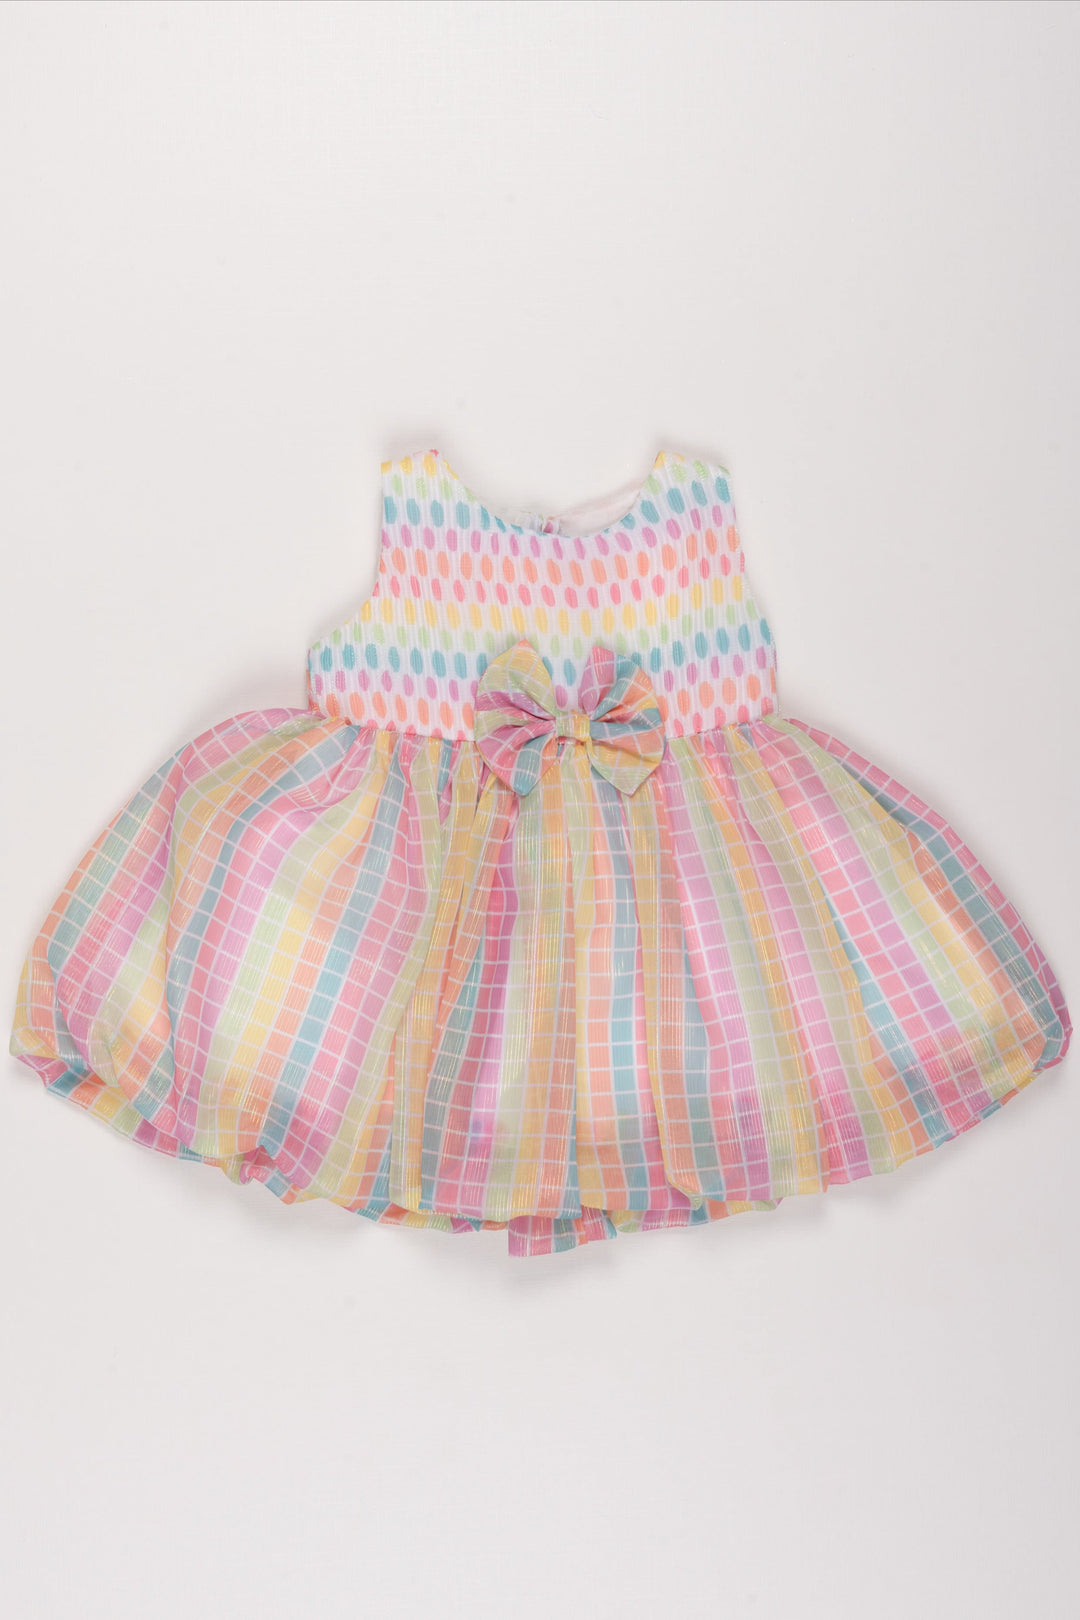 The Nesavu Baby Fancy Frock Infant Girl's Rainbow Plaid Frock with Polka Dot Bodice and Bow Accent - Perfect for Birthday Parties Nesavu 12 (3M) / Yellow BFJ504A-12 Rainbow Plaid and Polka Dot Frock for Infants | Festive Party Dress | The Nesavu